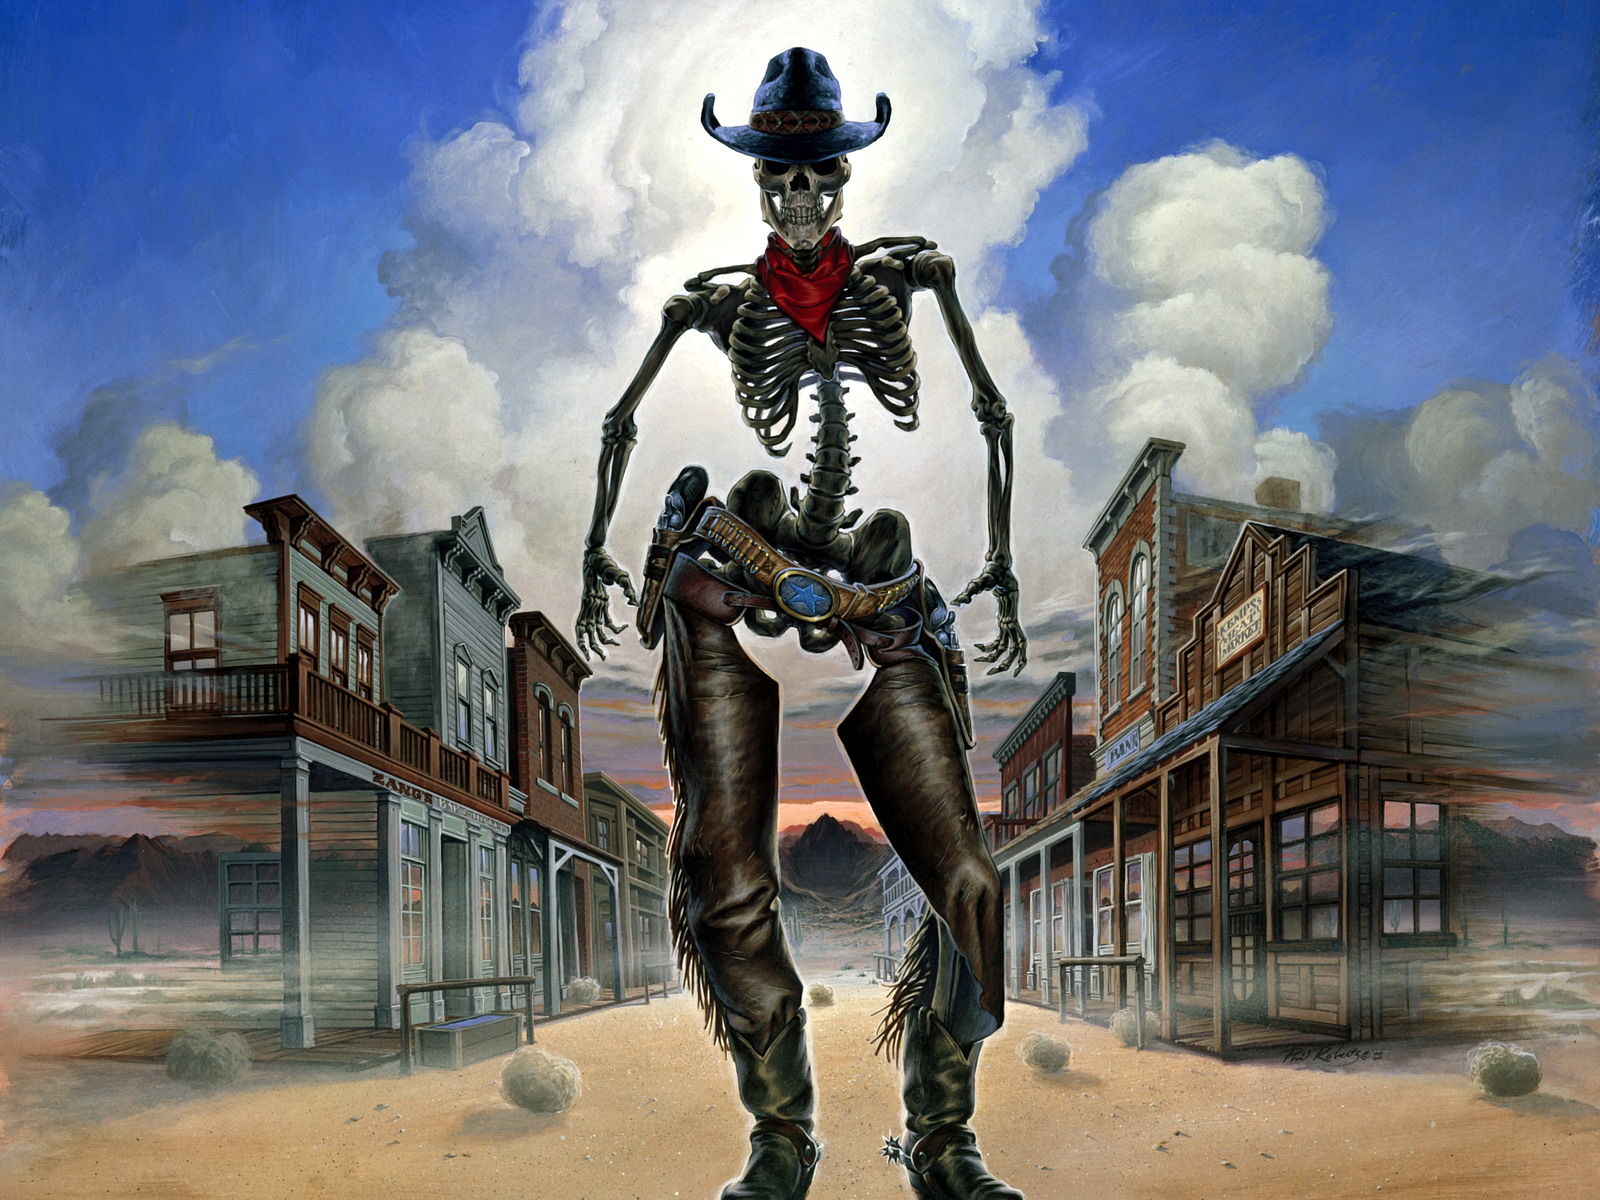 ghost town wallpaper,action adventure game,cg artwork,illustration,art,fictional character